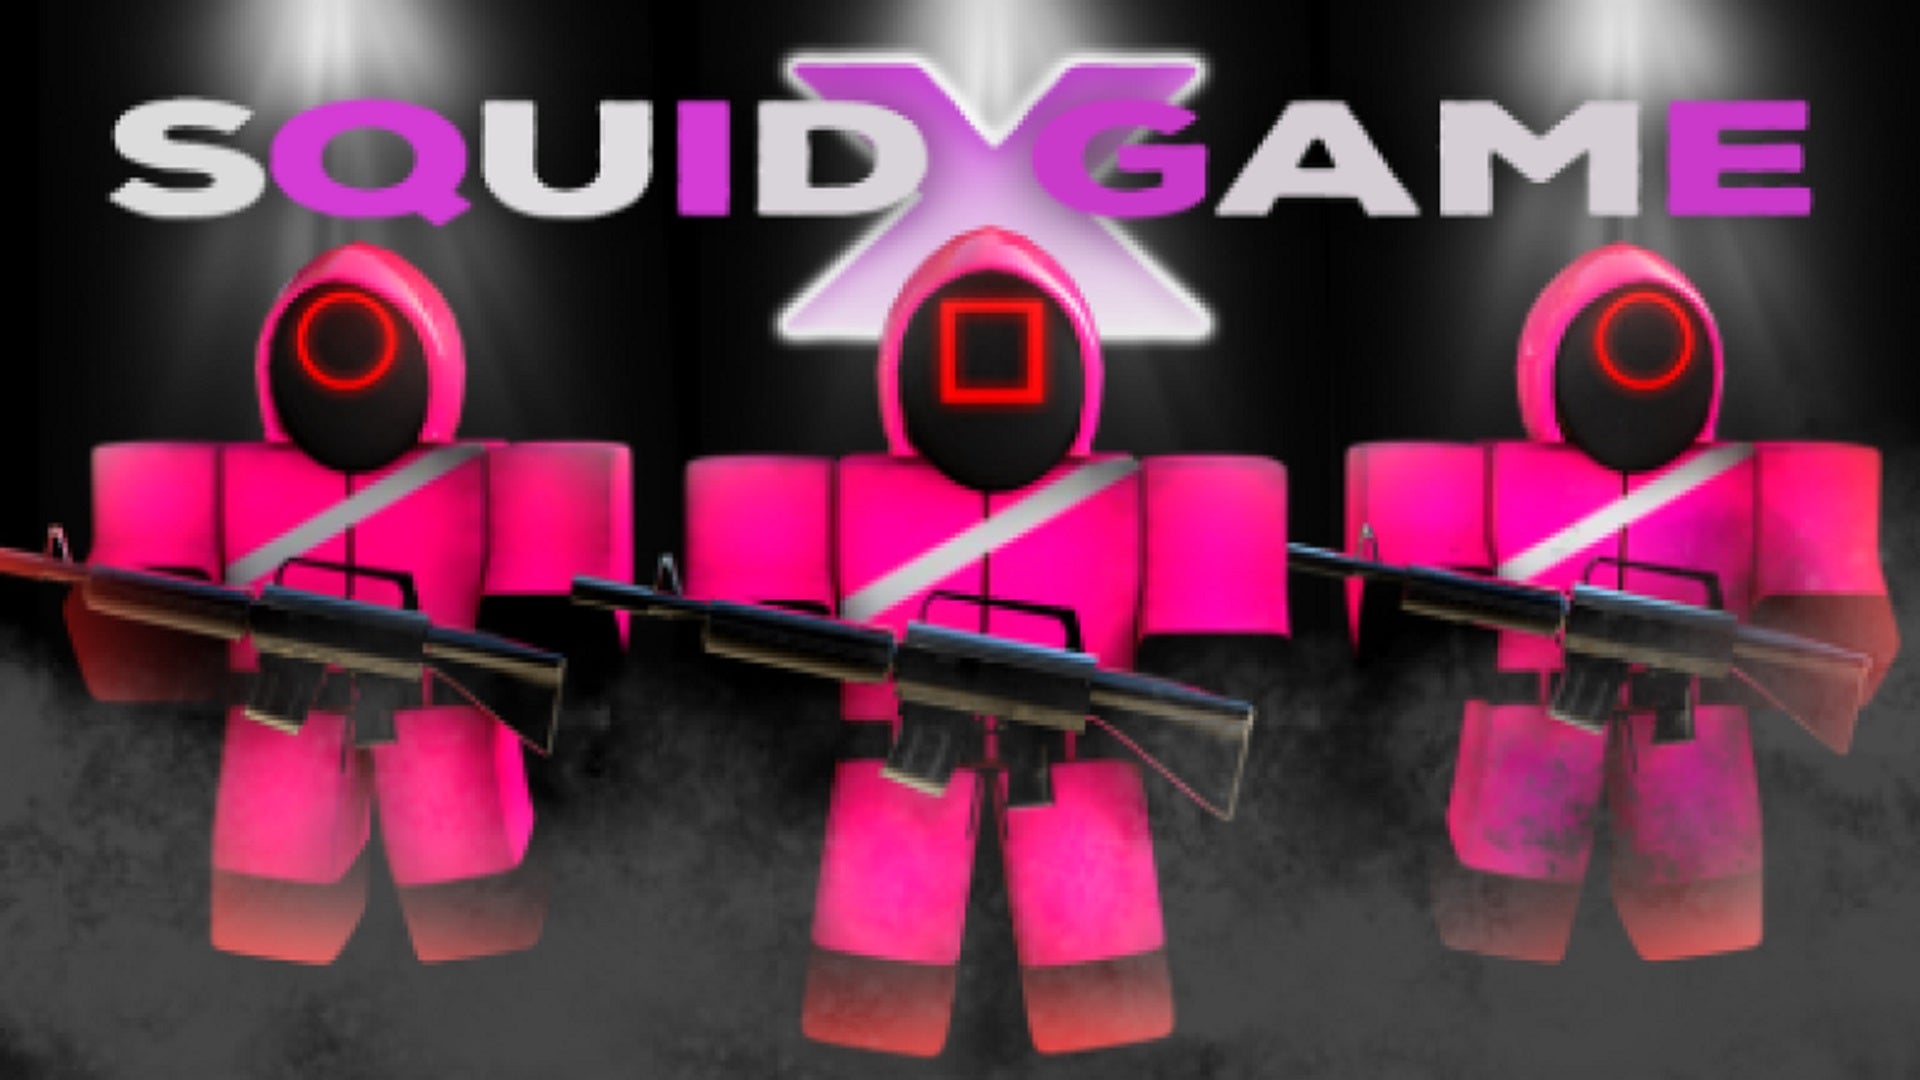 Three Roblox characters in Squid Game guard costumes. Text in image reads "Squid Game X".